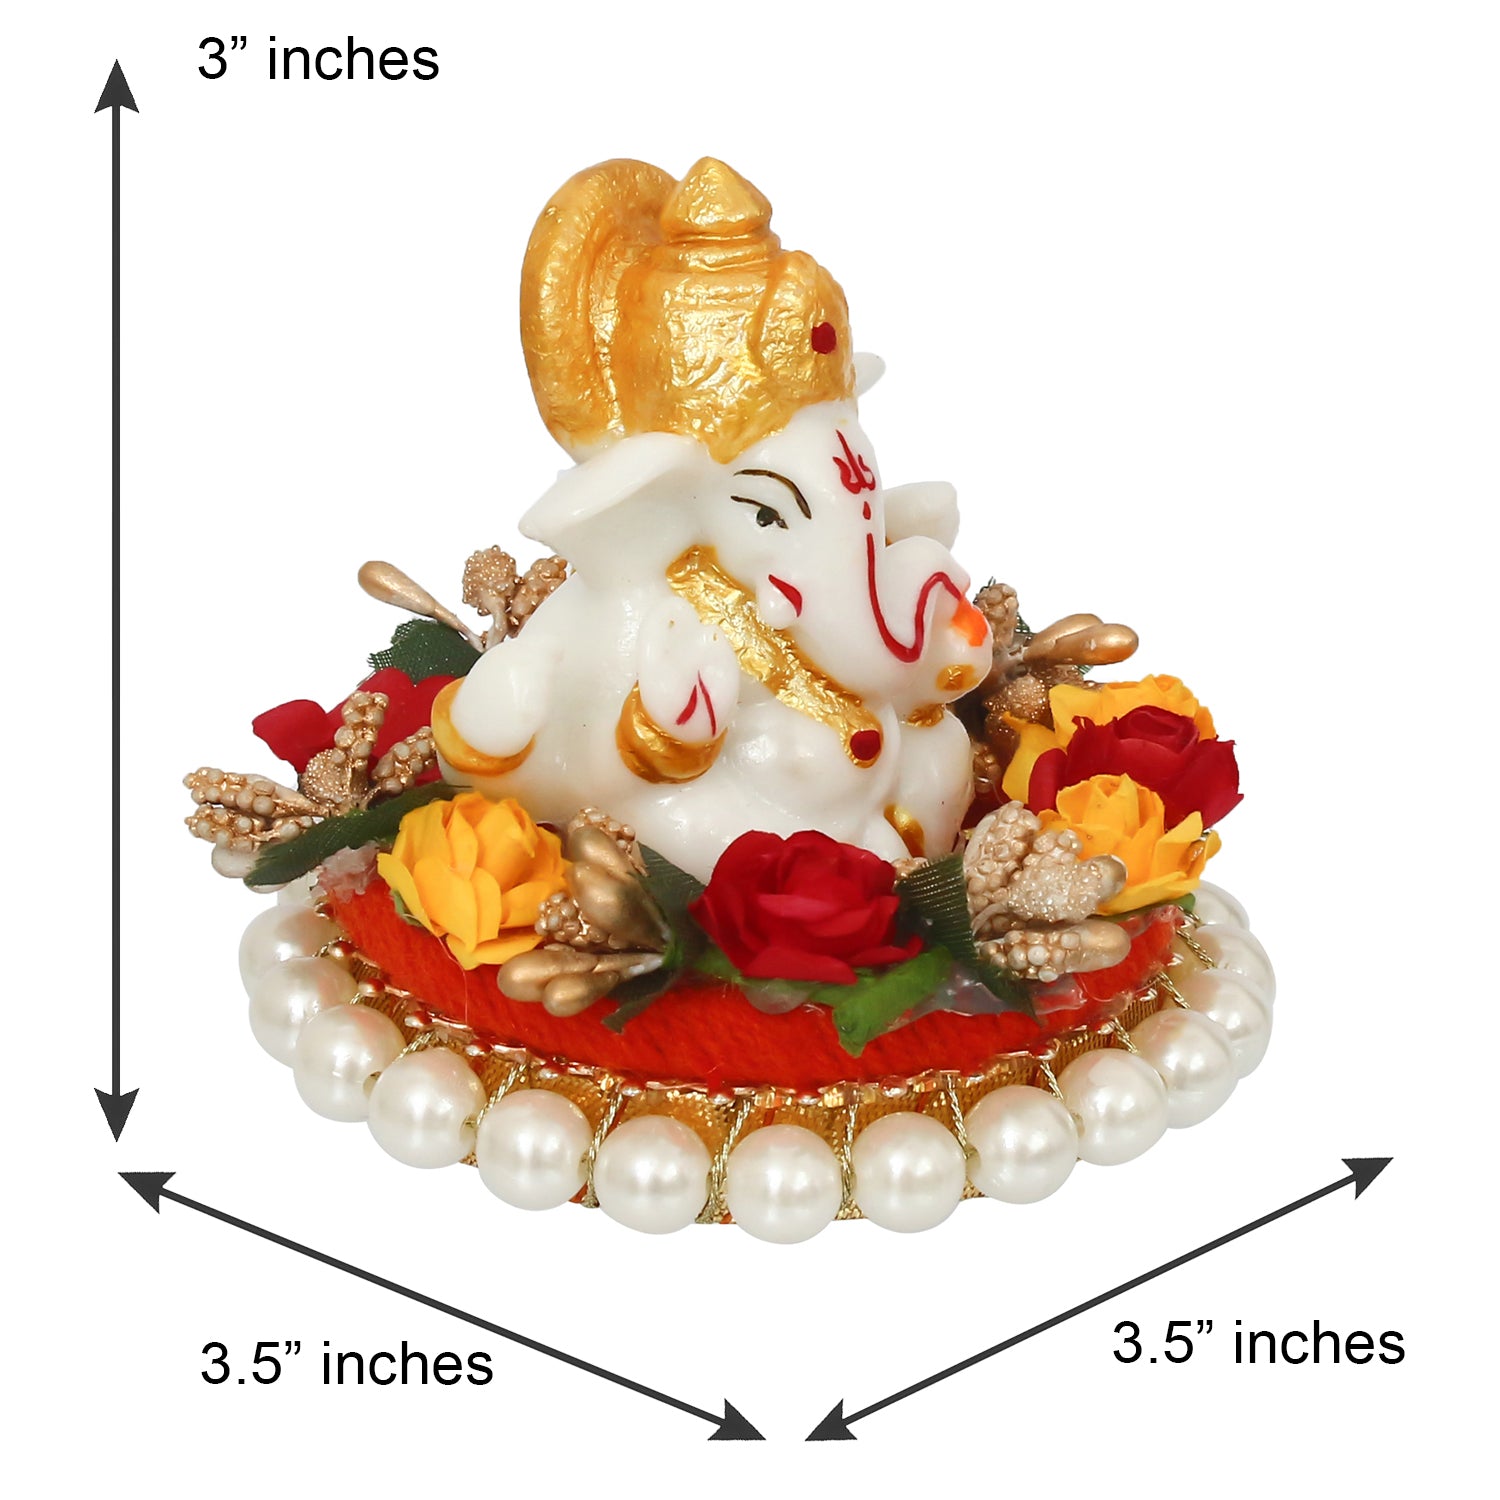 Polyresin Lord Ganesha Statue on Decorative Handcrafted Plate for Home, Office and Car Dashboard 5